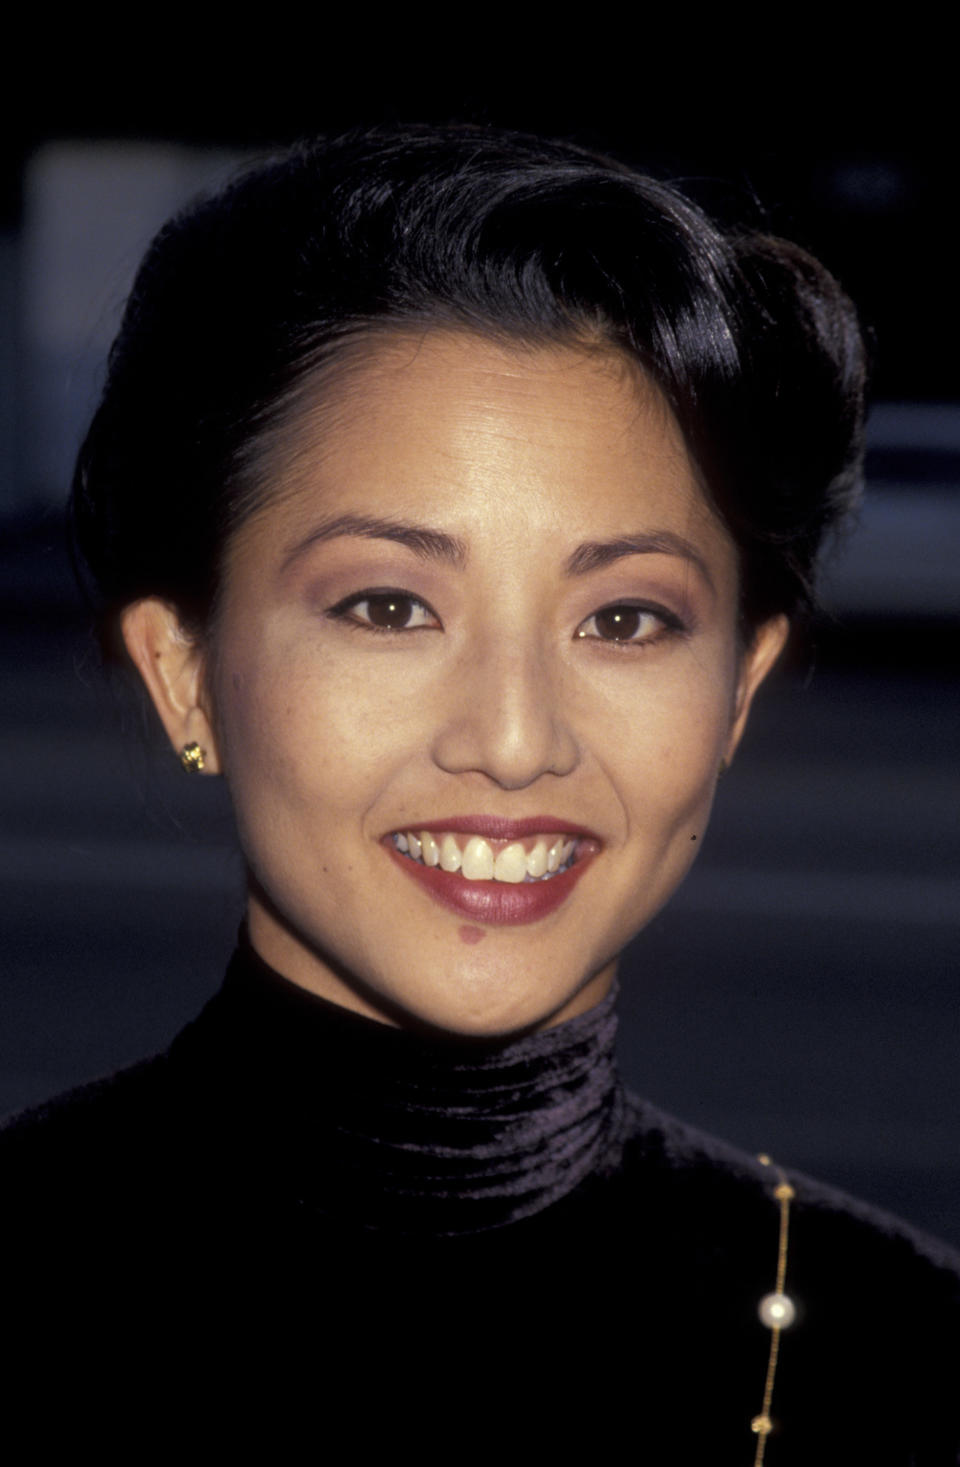 Tamlyn Tomita attends the screening of "The Joy Luck Club" on August 28, 1993 at the Crest Theater in Westwood, California